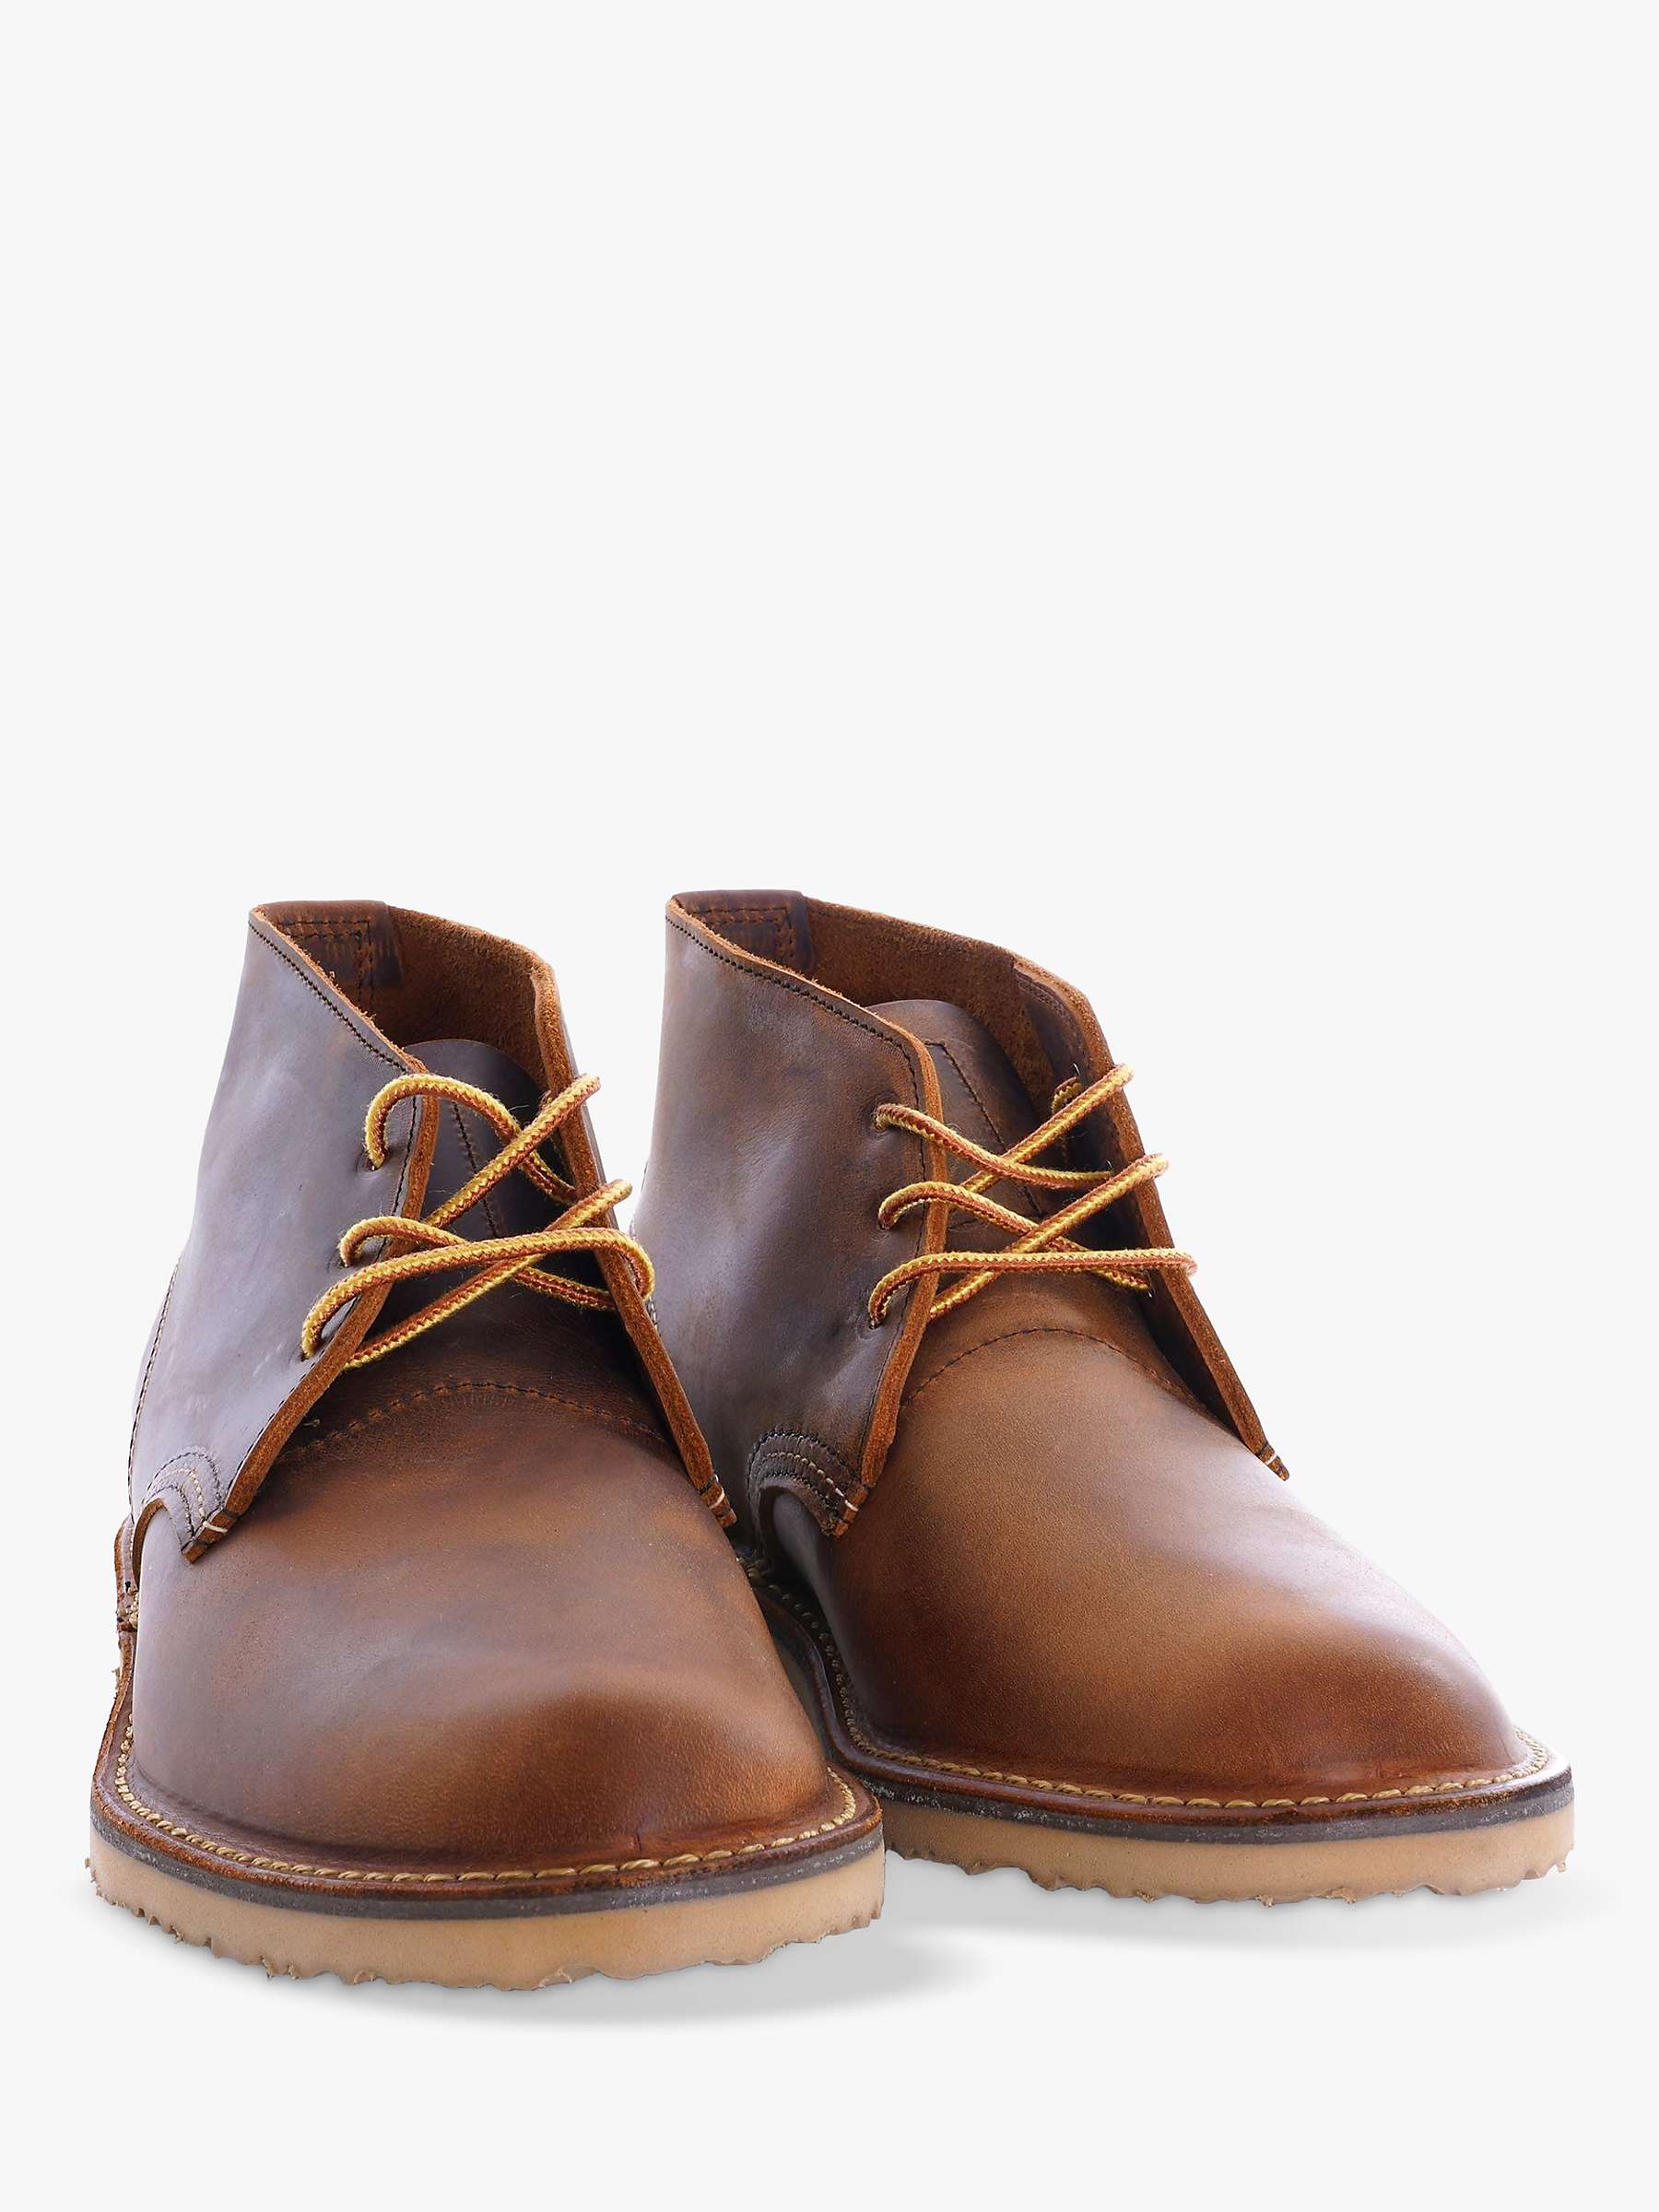 Buy Red Wing Weekender 3322 Chukka Boots, Copper Online at johnlewis.com